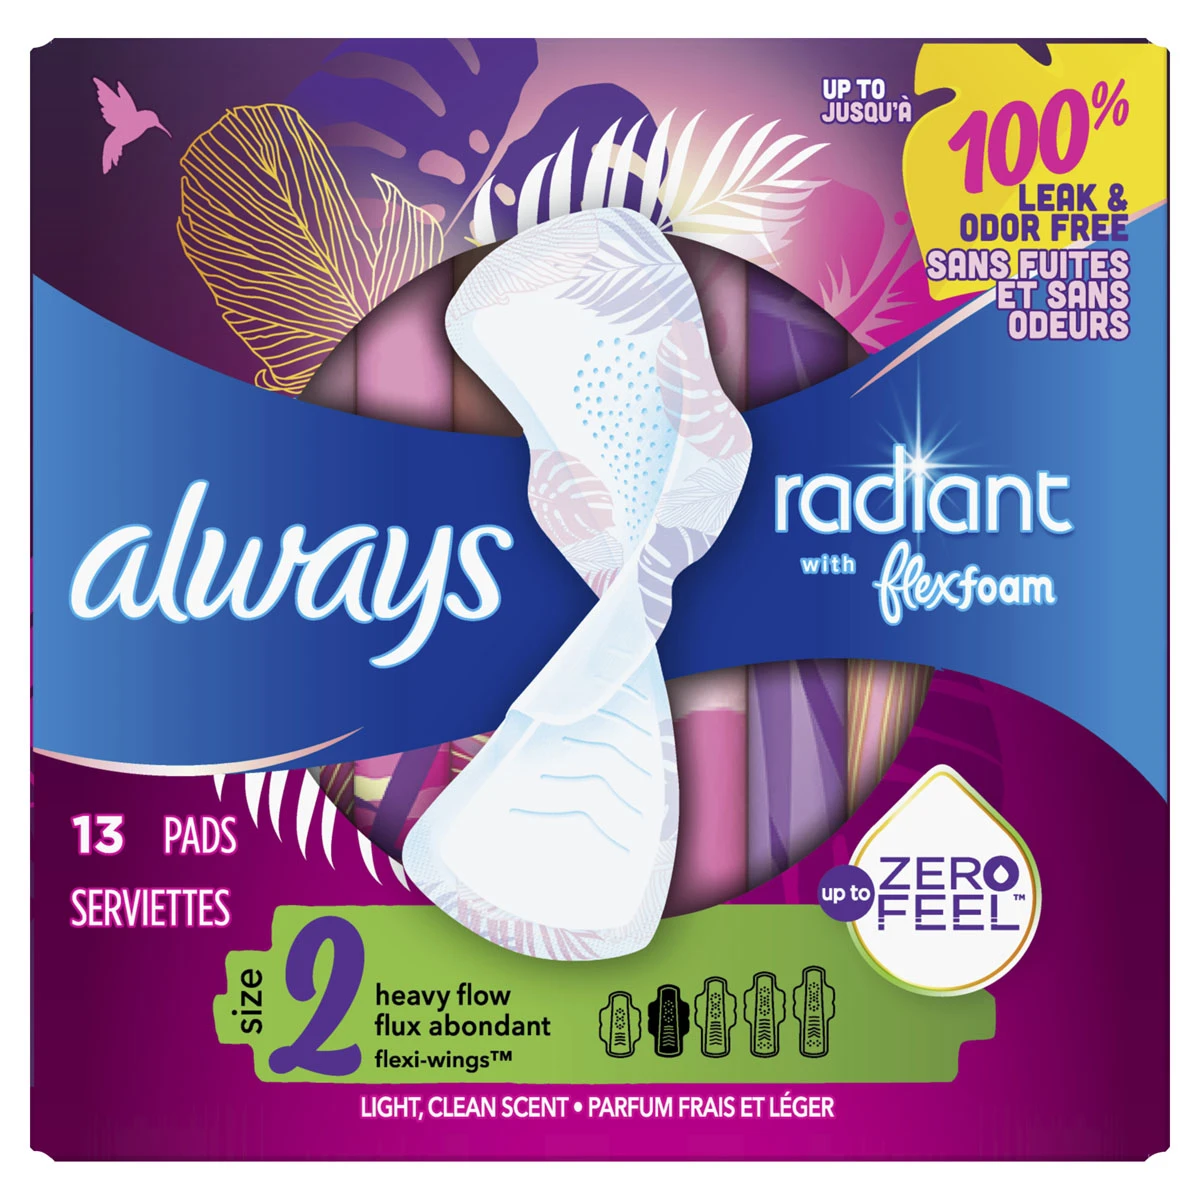 Product-Always Radiant Size 2 Heavy Flow Pads, Light Clean Scent